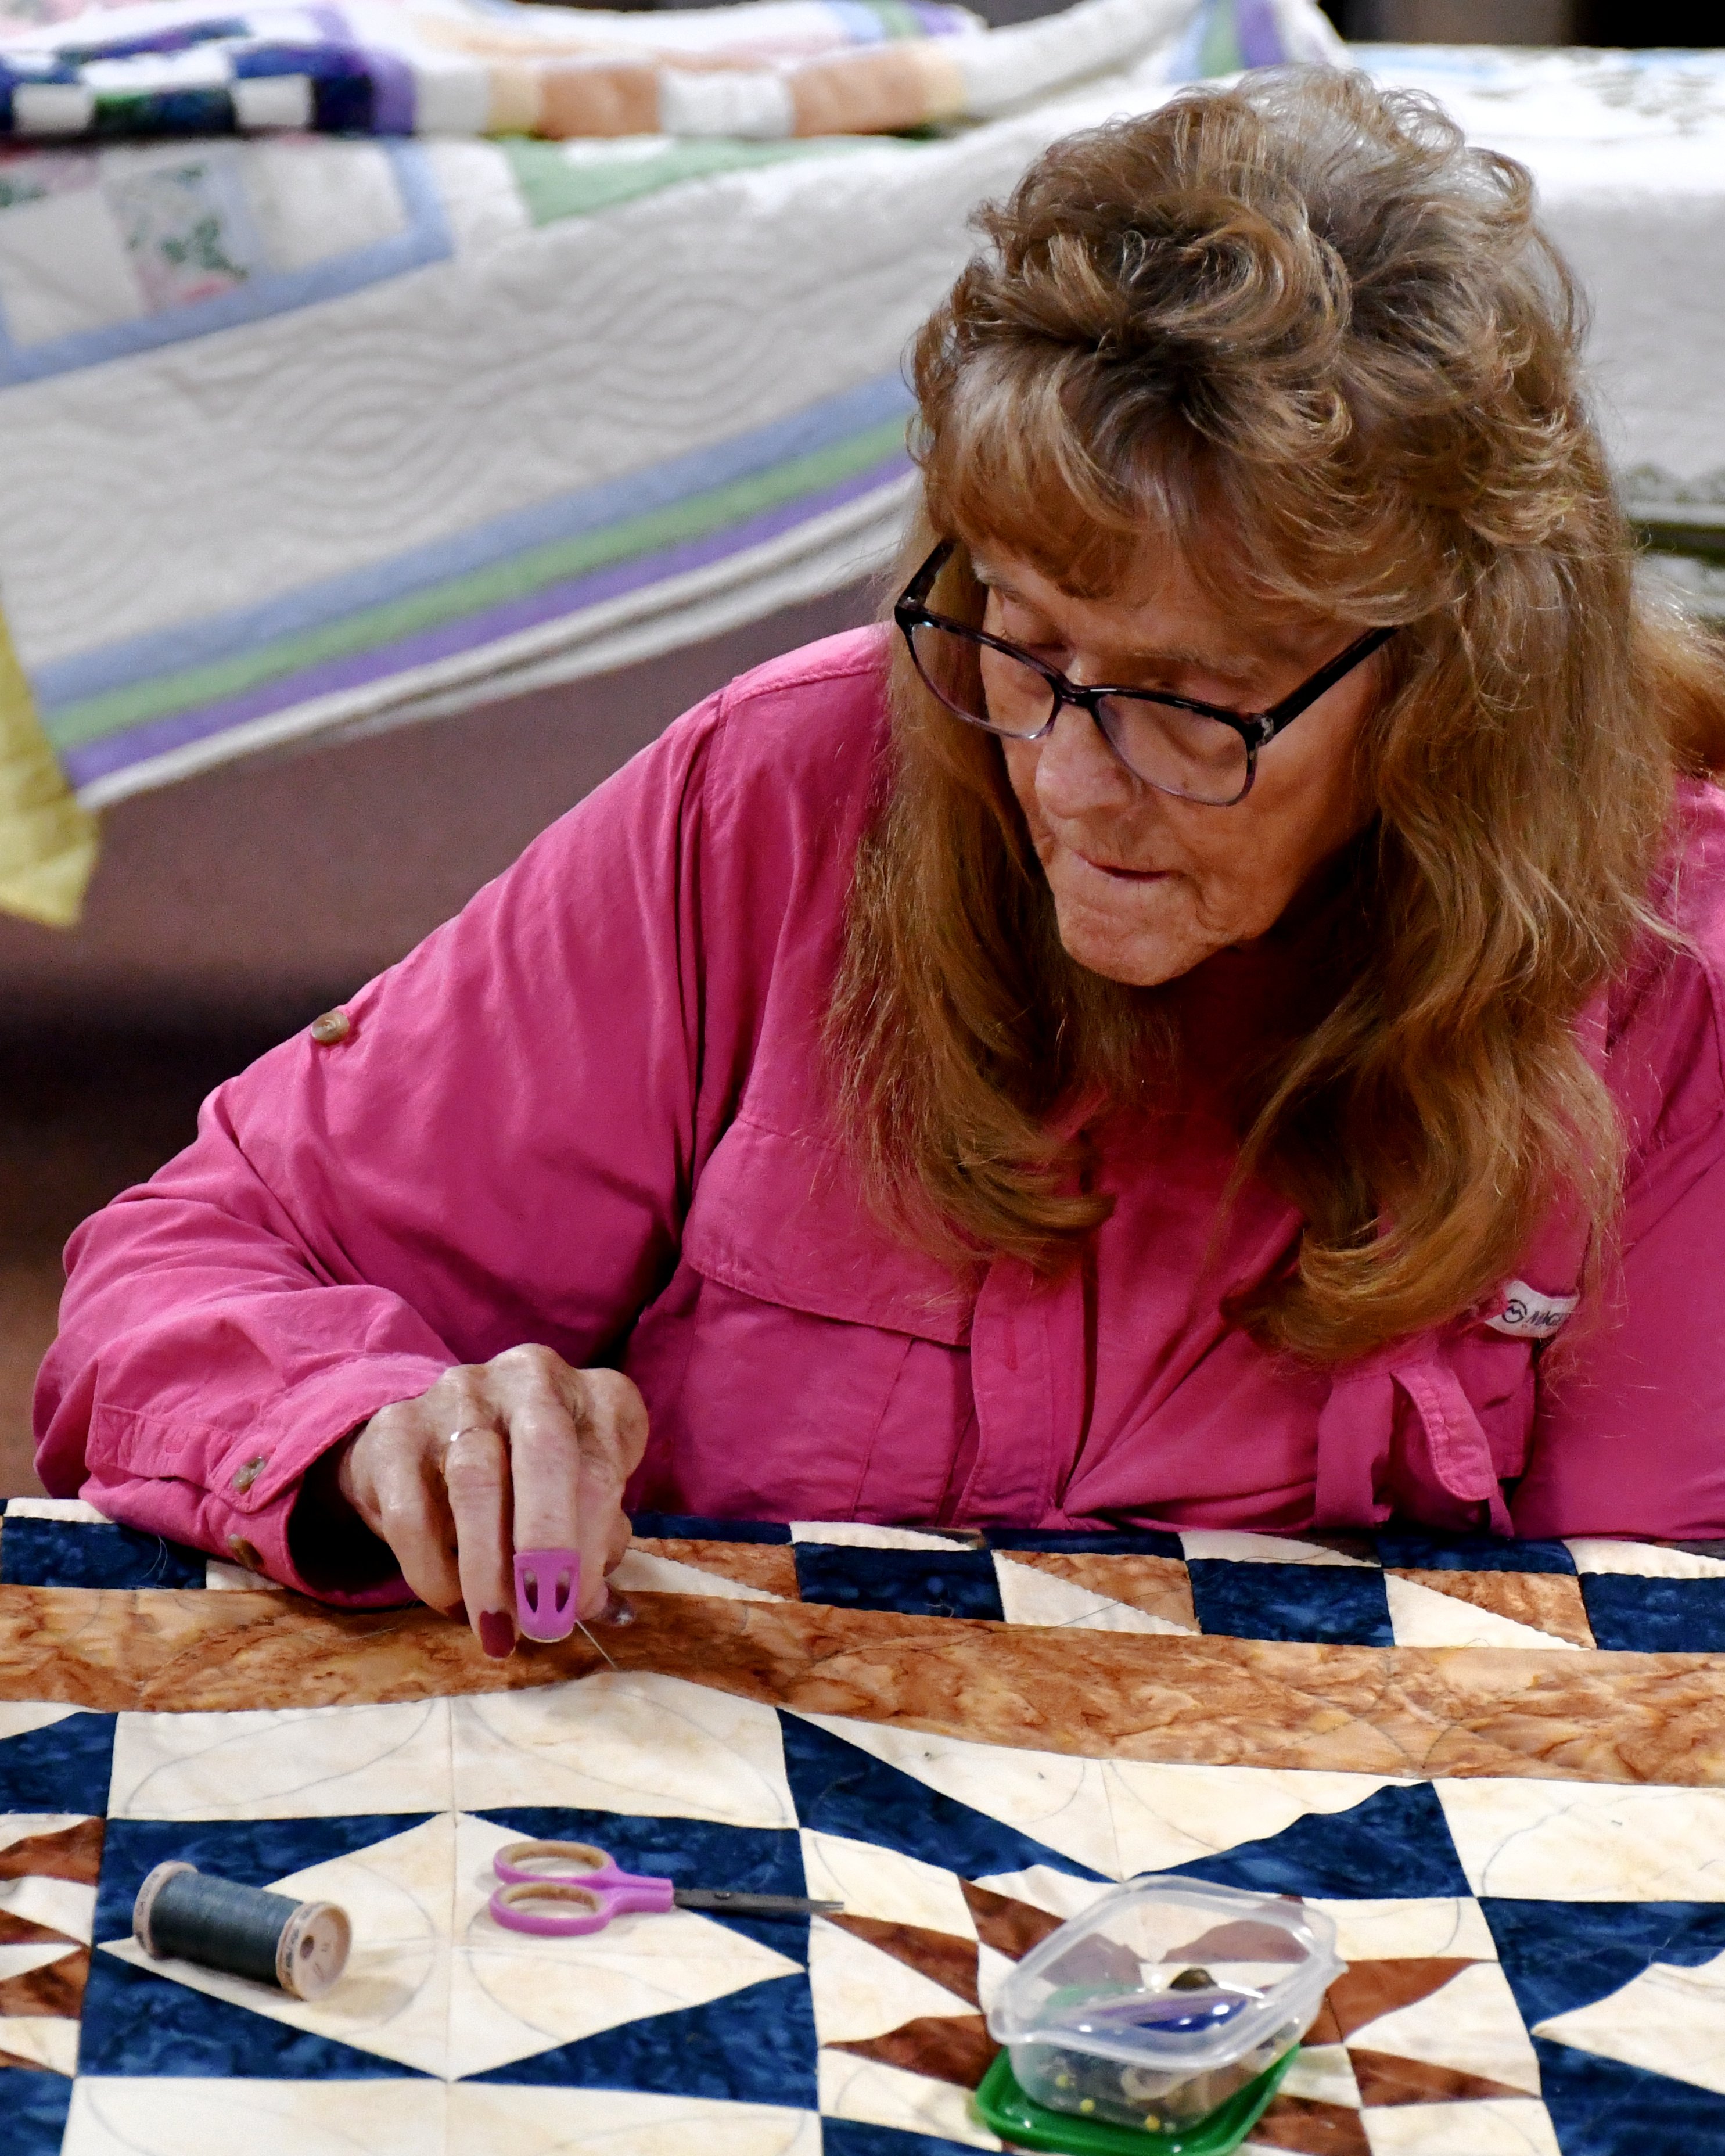 A woman in a pink shirt works on a quilt